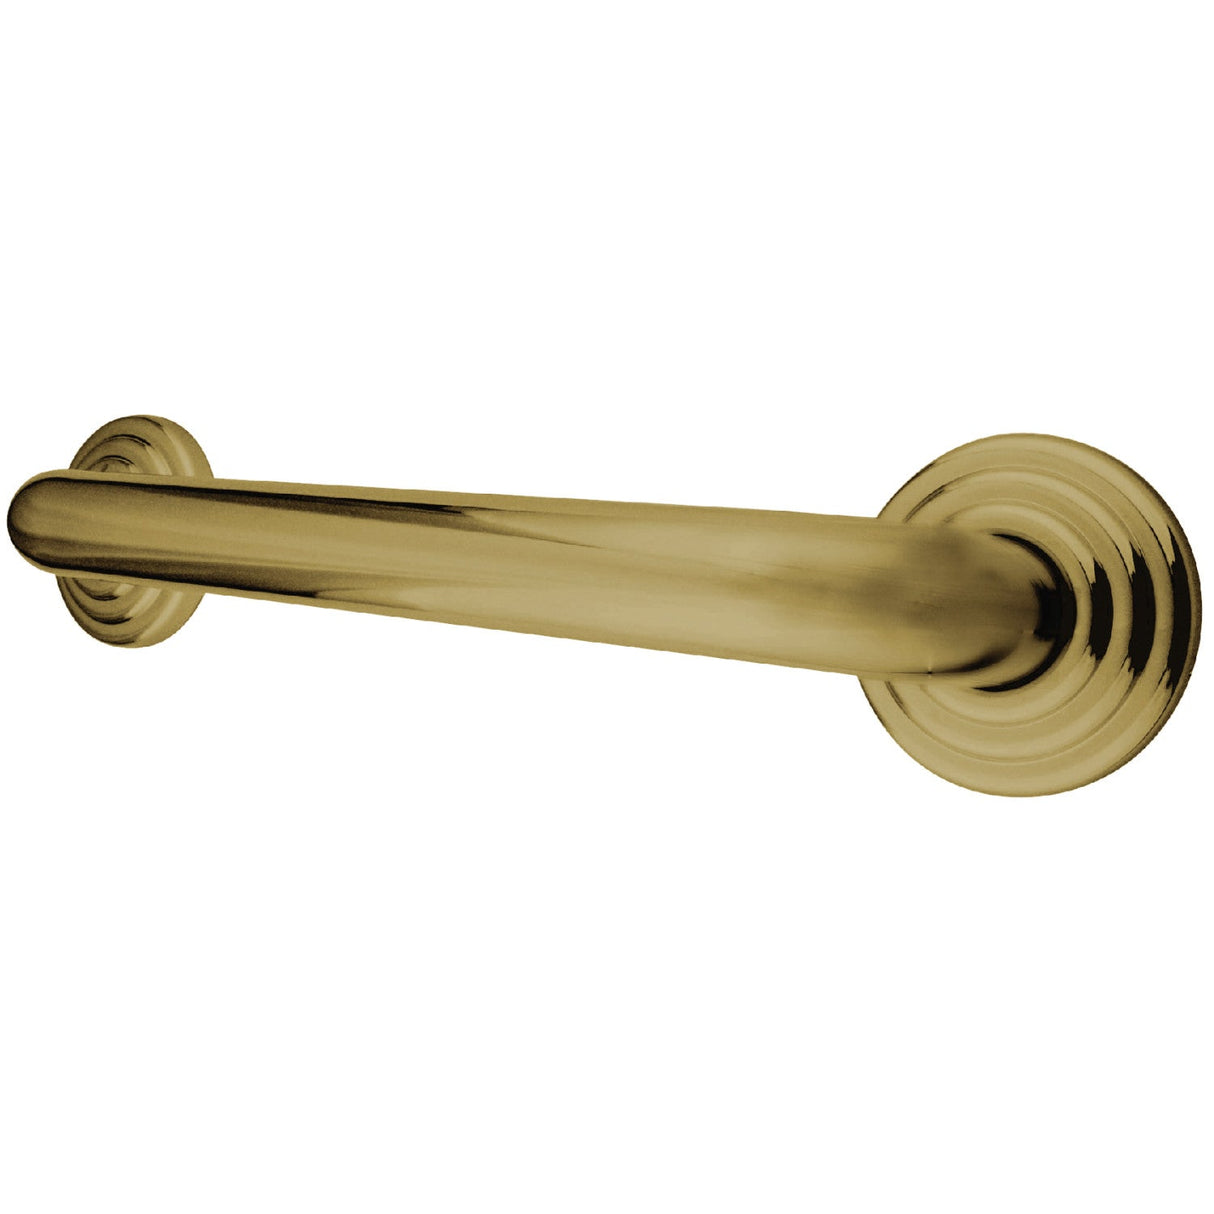 Restoration Thrive In Place DR314362 36-Inch X 1-1/4 Inch O.D Grab Bar, Polished Brass